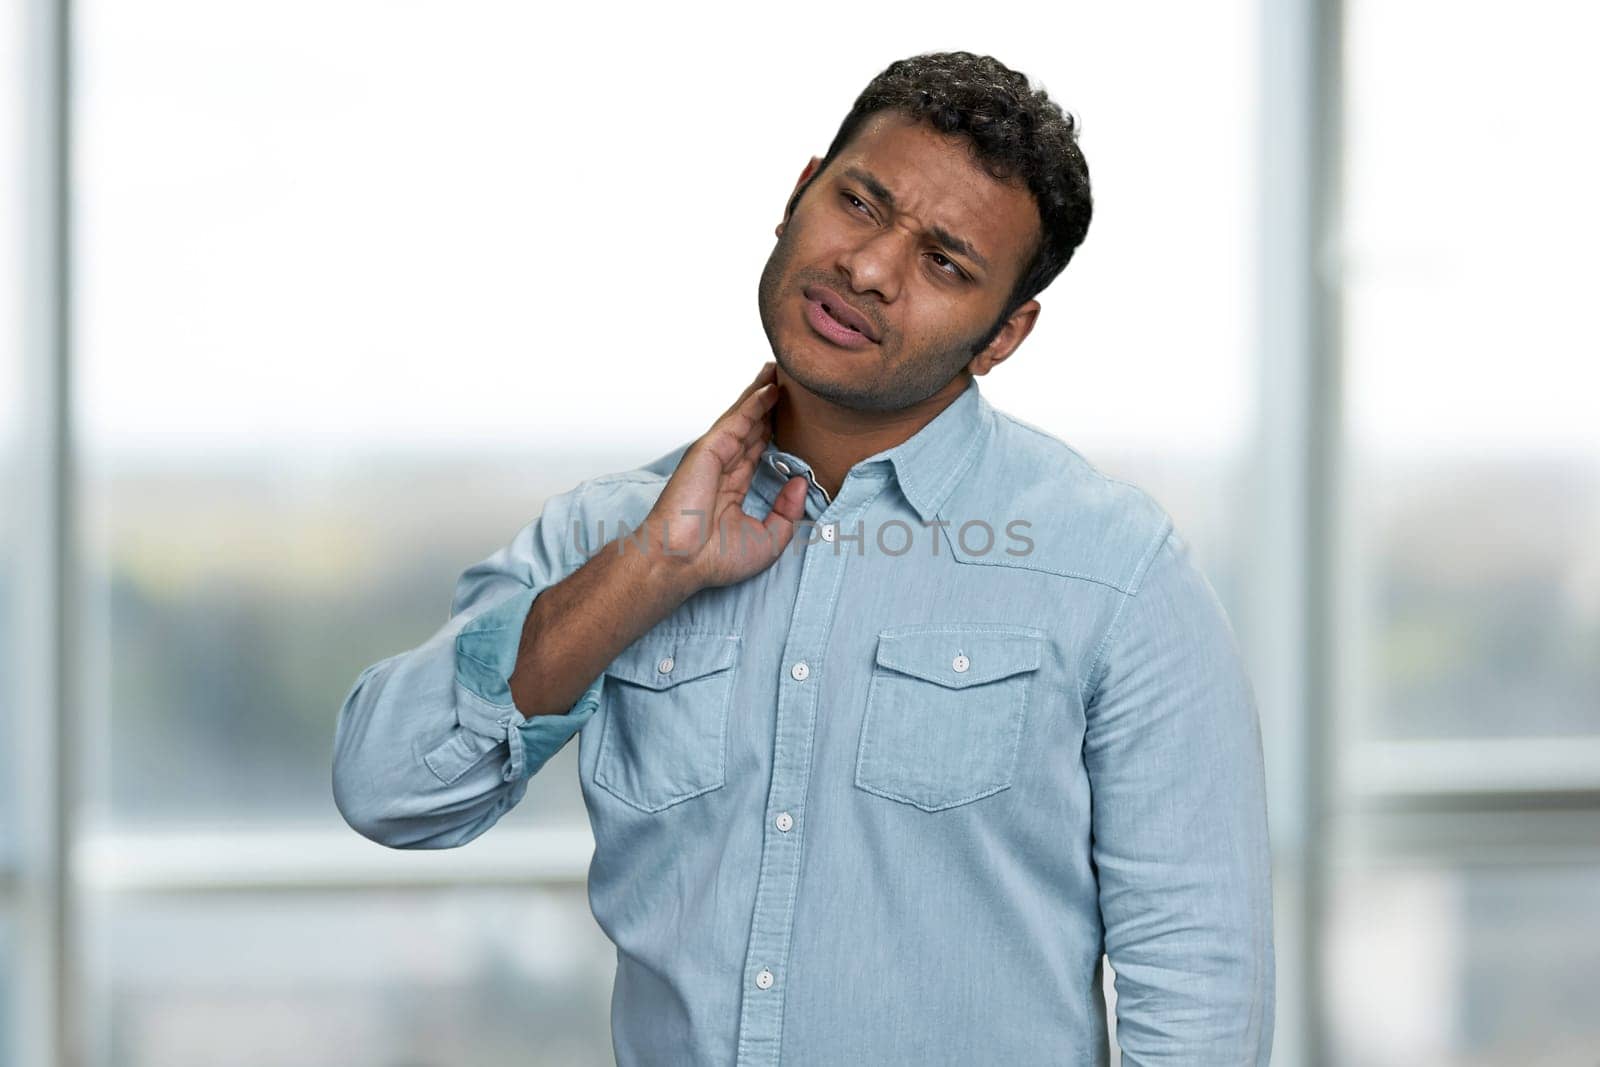 Young indian man suffering from neck pain on blur interior background. People and healthcare concept.